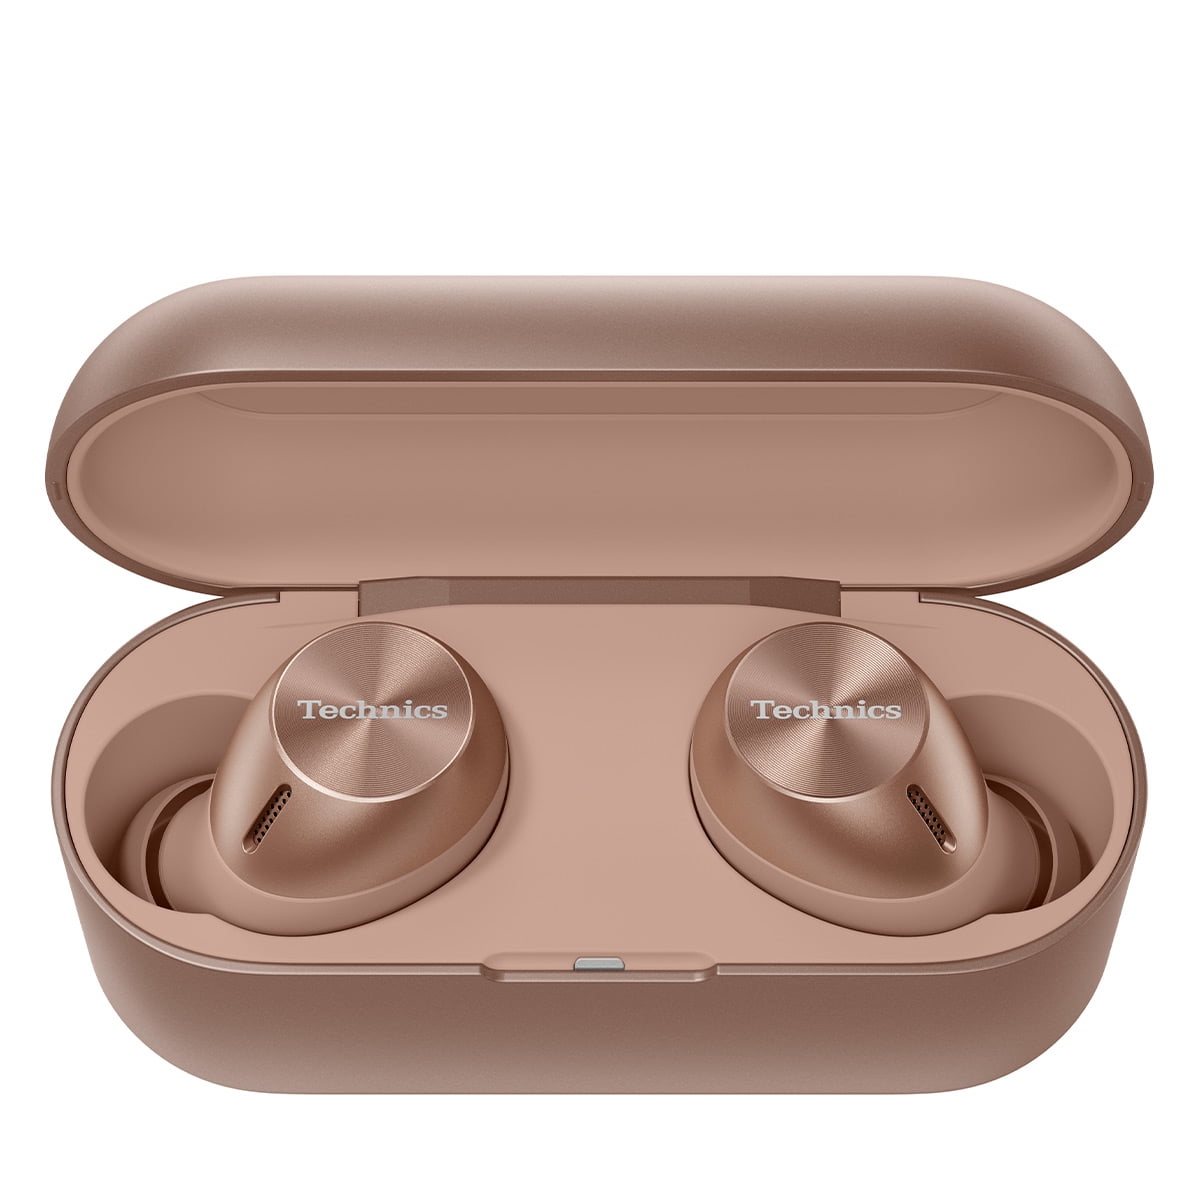 Technics Earbuds, True Wireless with Charging Case, Rose Gold, EAHAZ40N